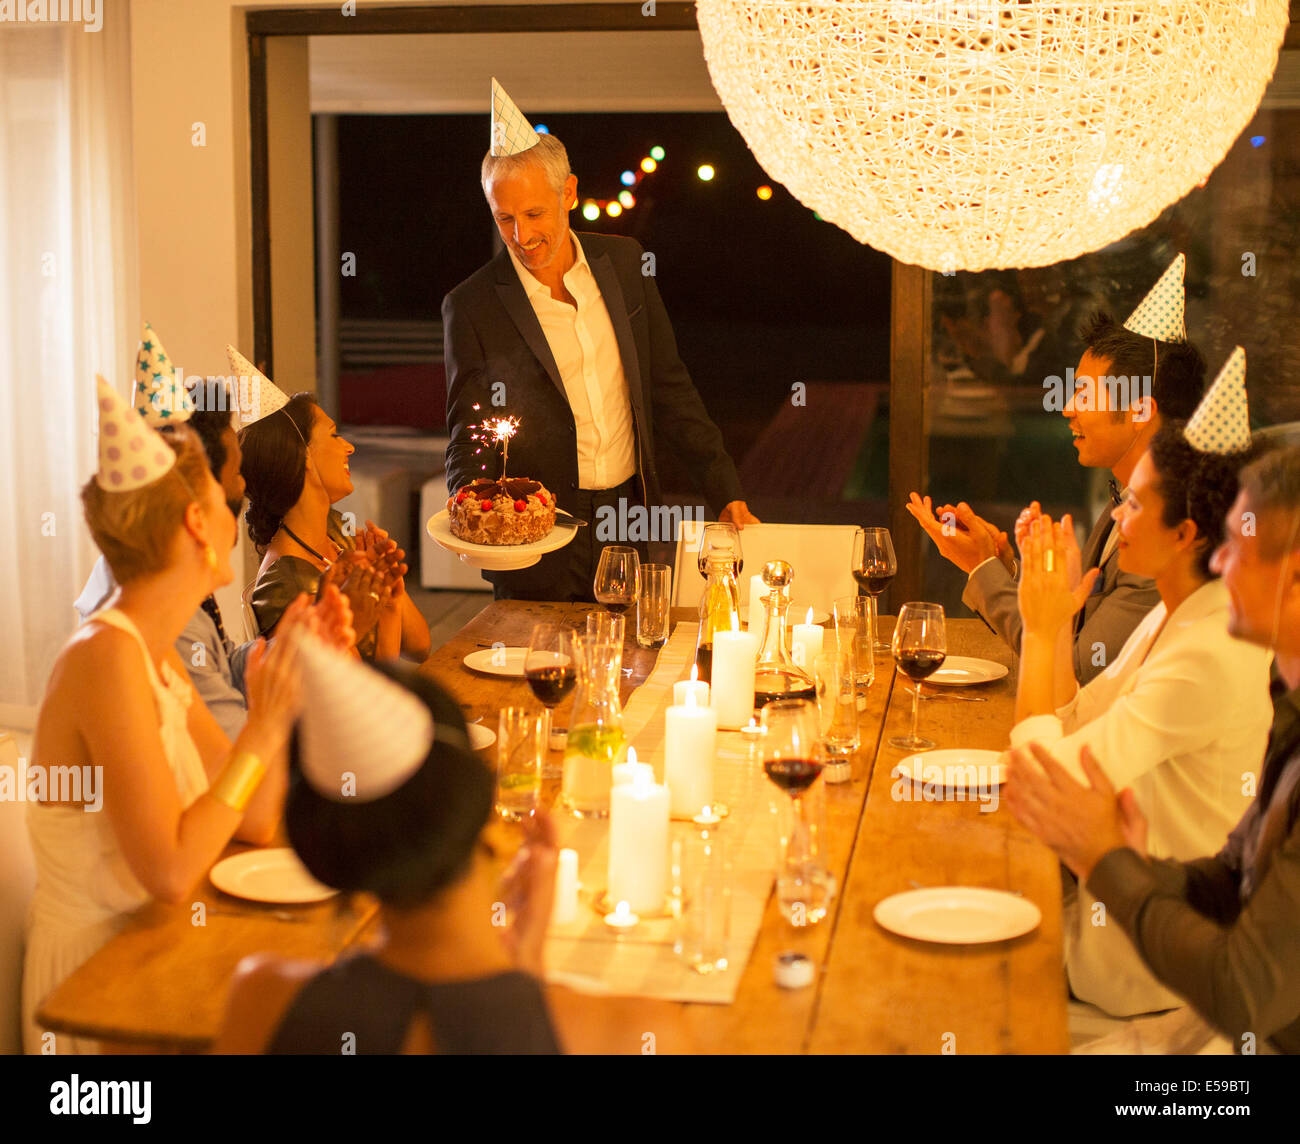 Man serving birthday cake at party Stock Photo